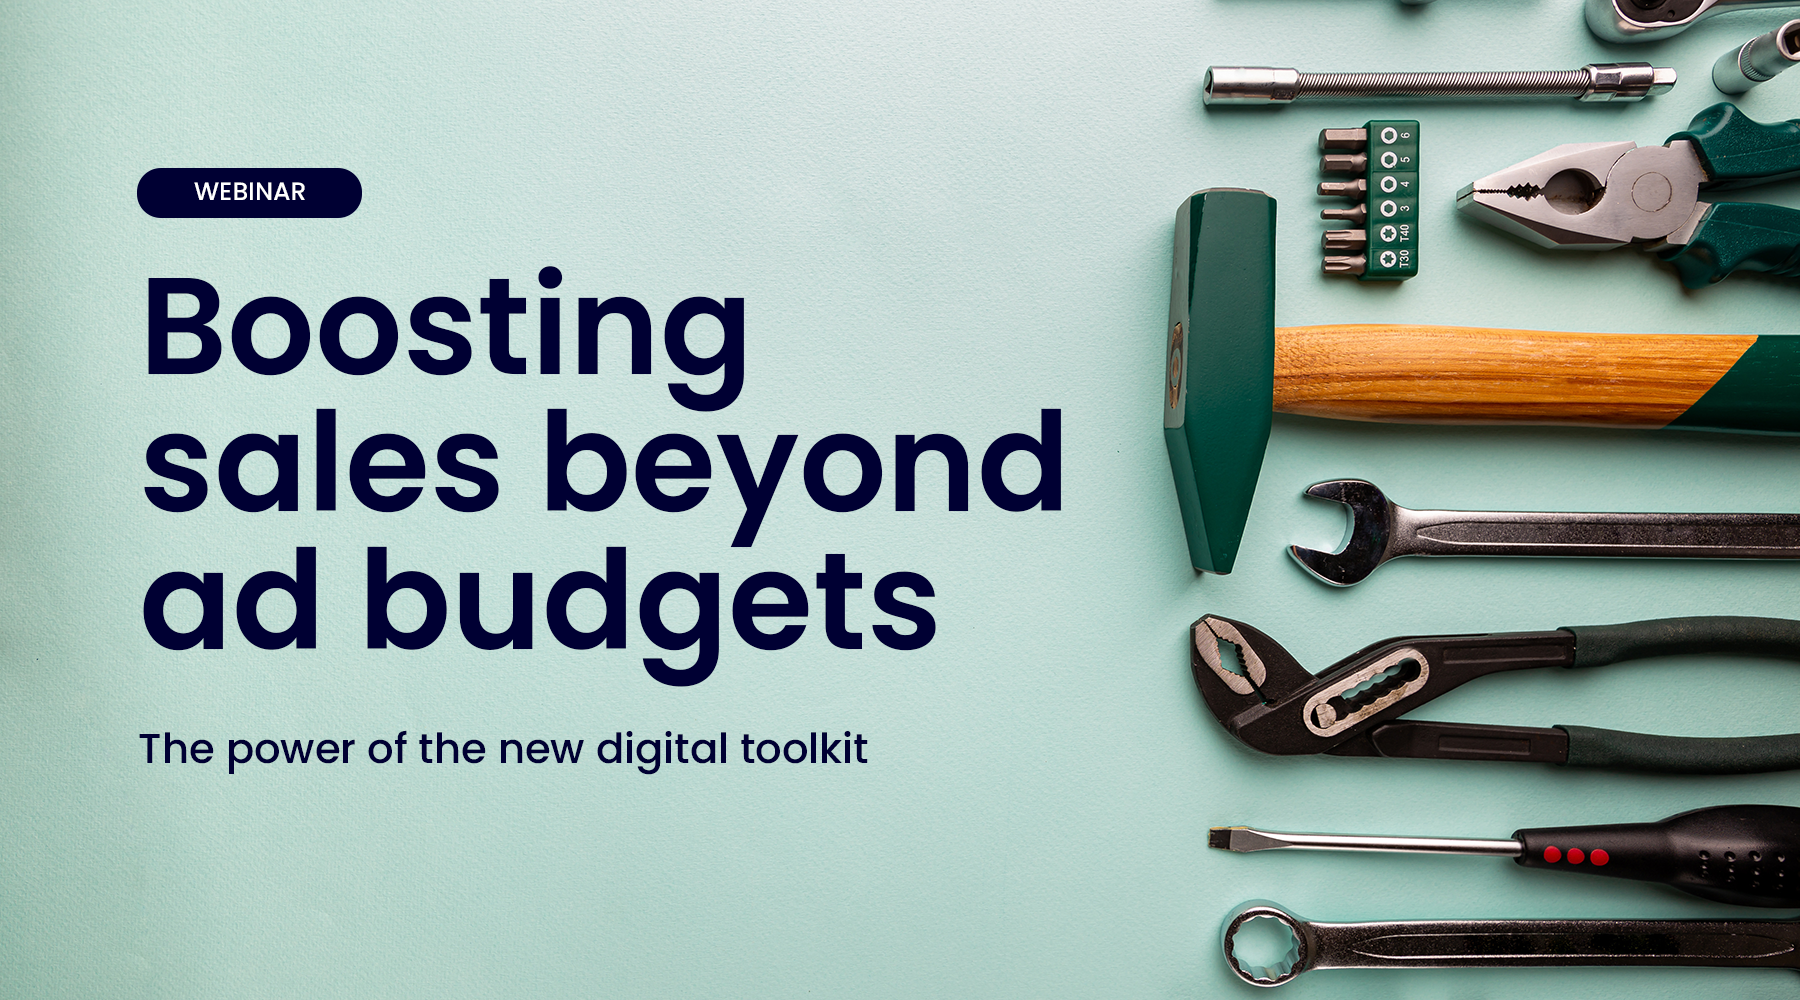 WEBINAR Boosting sales beyond ad budgets: The power of the new digital toolkit